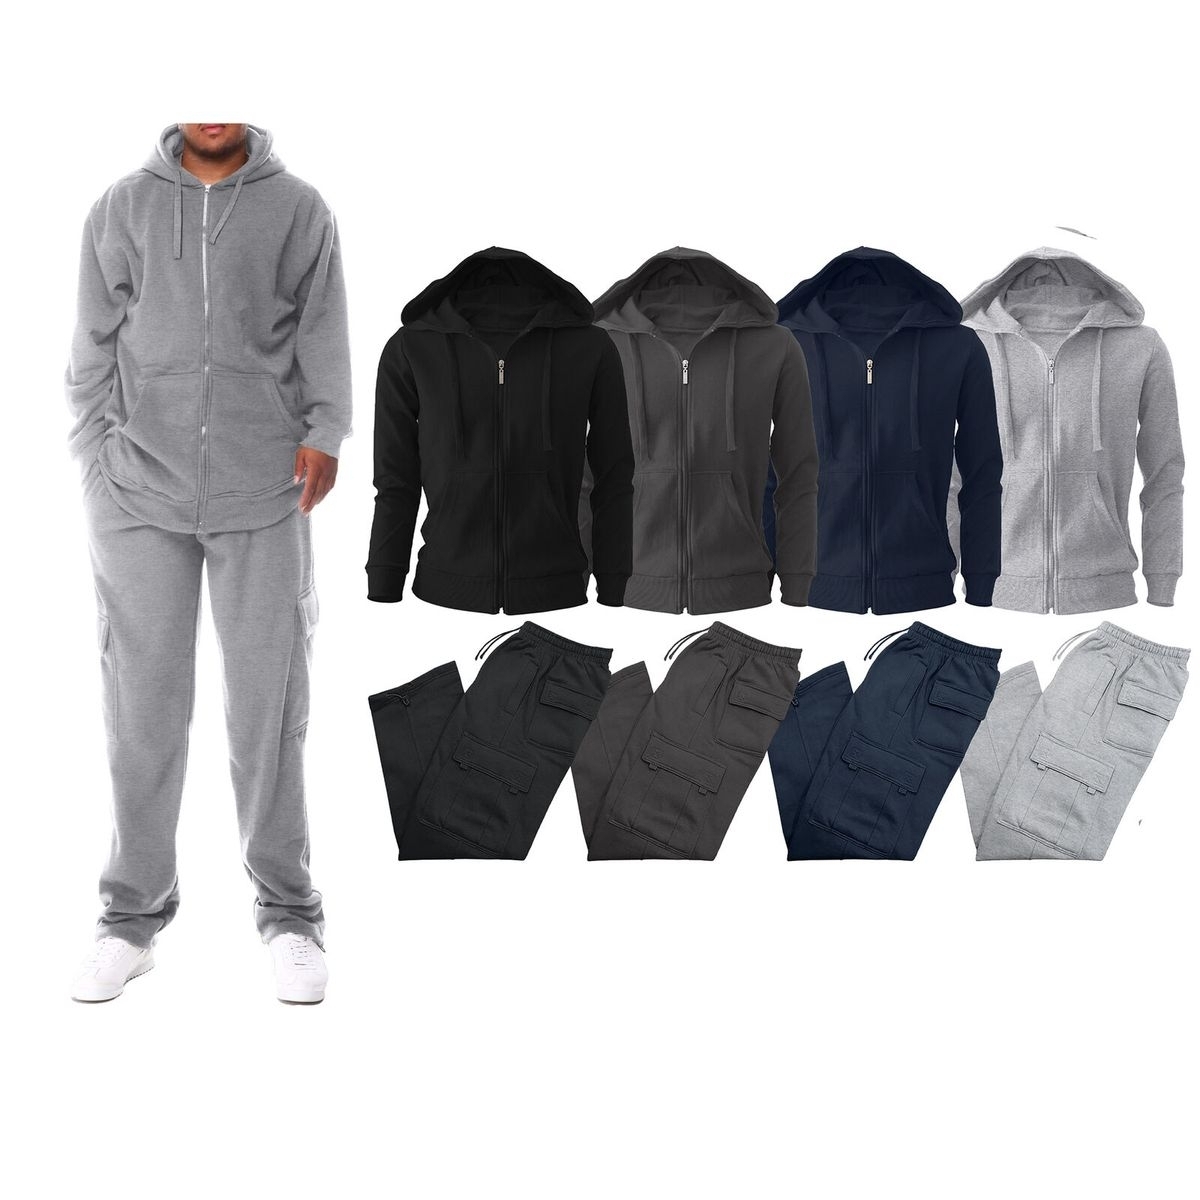 Multi-Pack: Men's Big & Tall Winter Warm Athletic Active Cozy Fleece Lined Multi-Pocket Full Zip Up Cargo Tracksuit - Charcoal, 2-pack, Smal